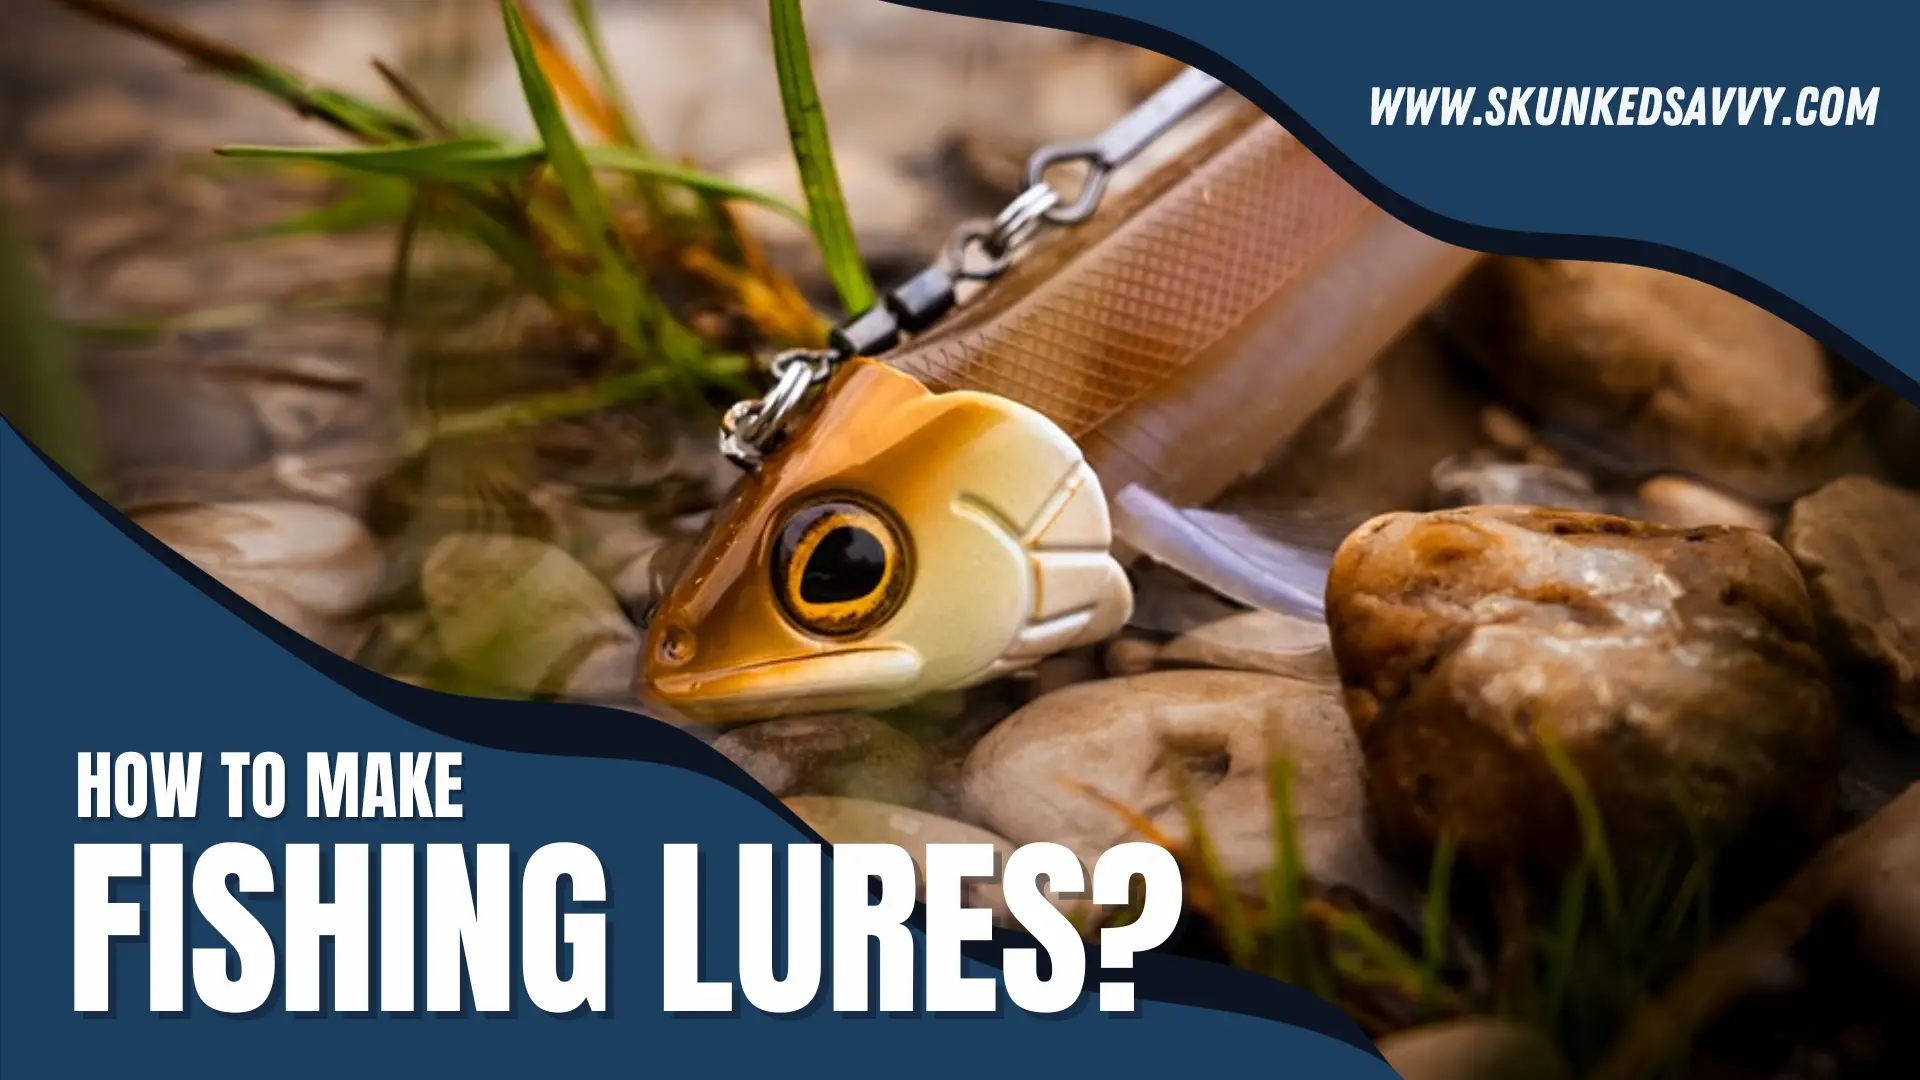 How to Make Fishing Lures